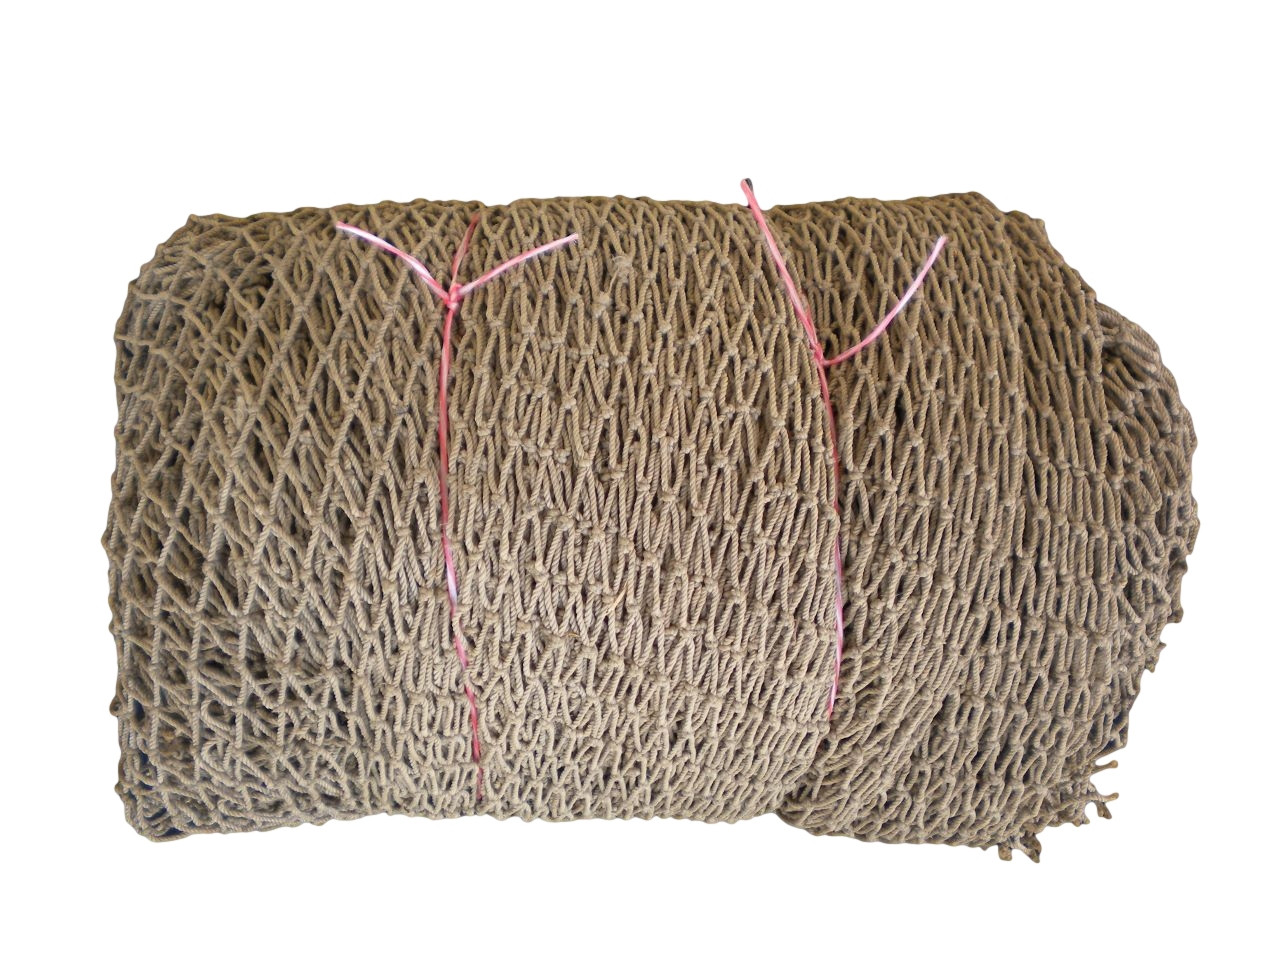 Large Section of Authentic Nautical Fishing Net